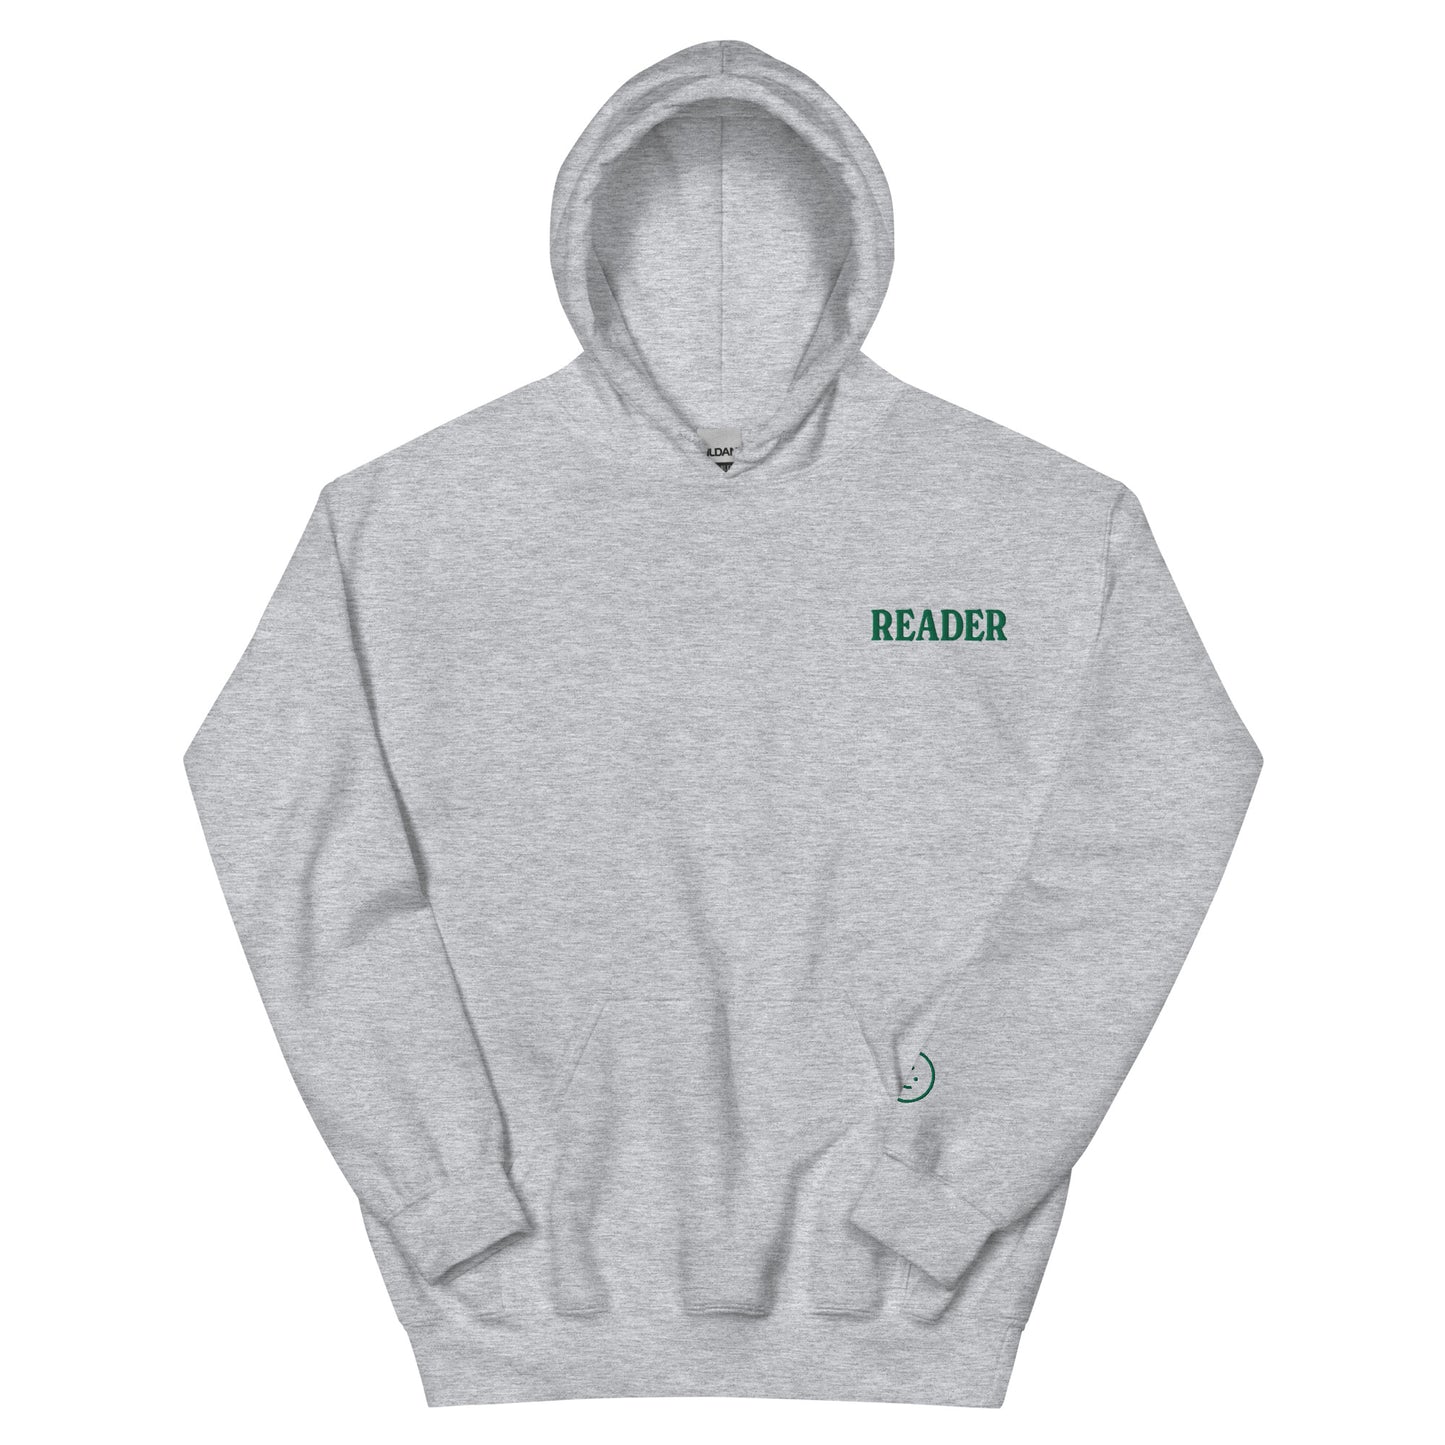 READER Embroidered Hoodie